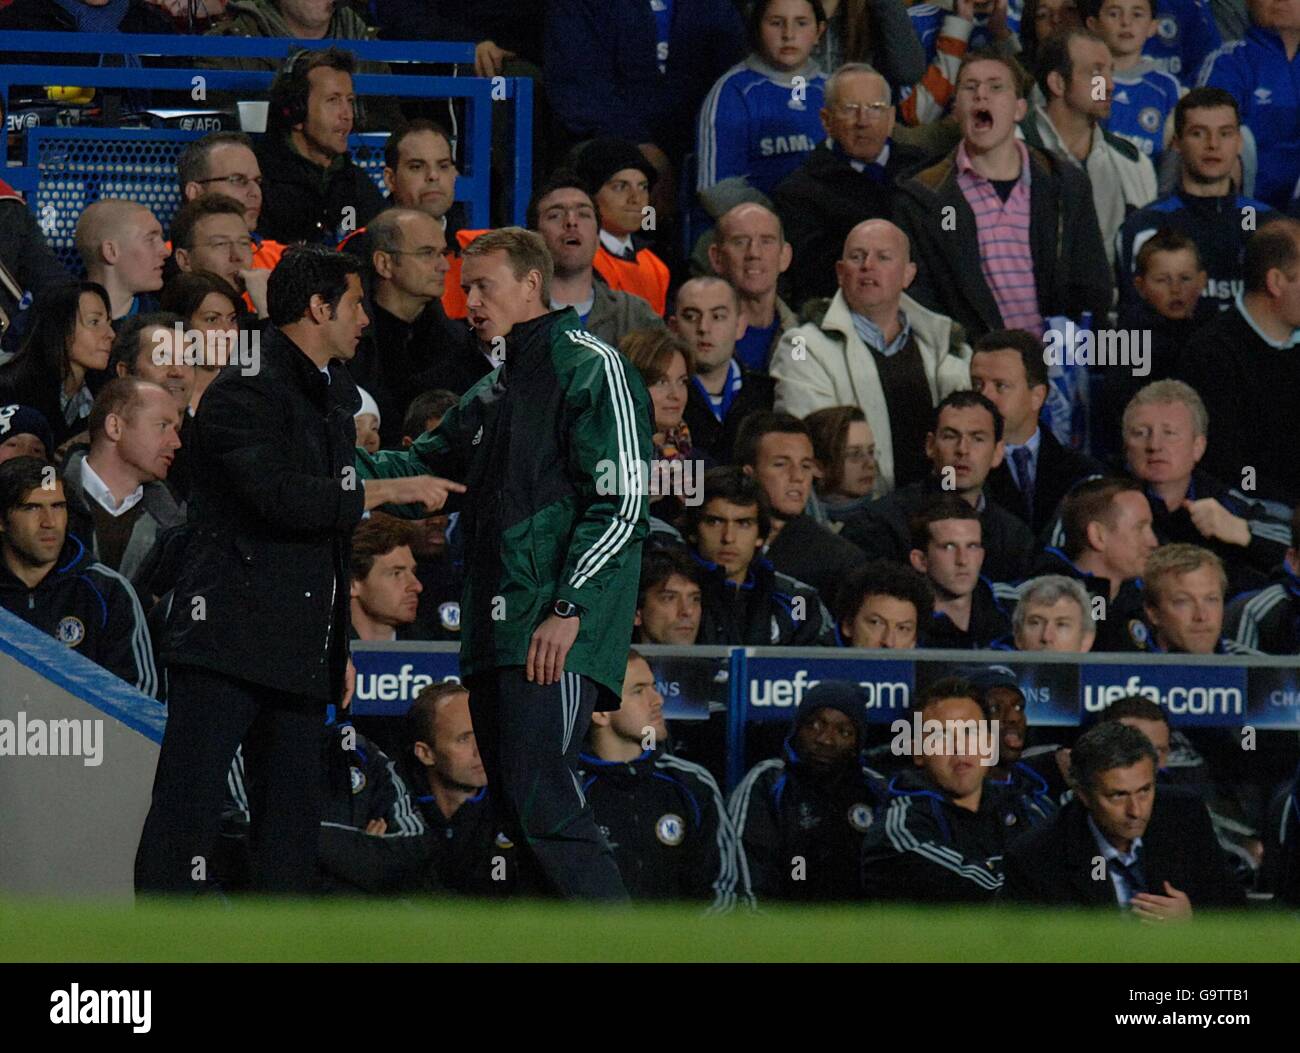 Soccer - UEFA Champions League - Quarter Final - First Leg - Chelsea v Valencia - Stamford Bridge. Valencia coach Quique Sanchez Flores gestures from the touchline to talk to Chelsea manager Jose Mourinho Stock Photo